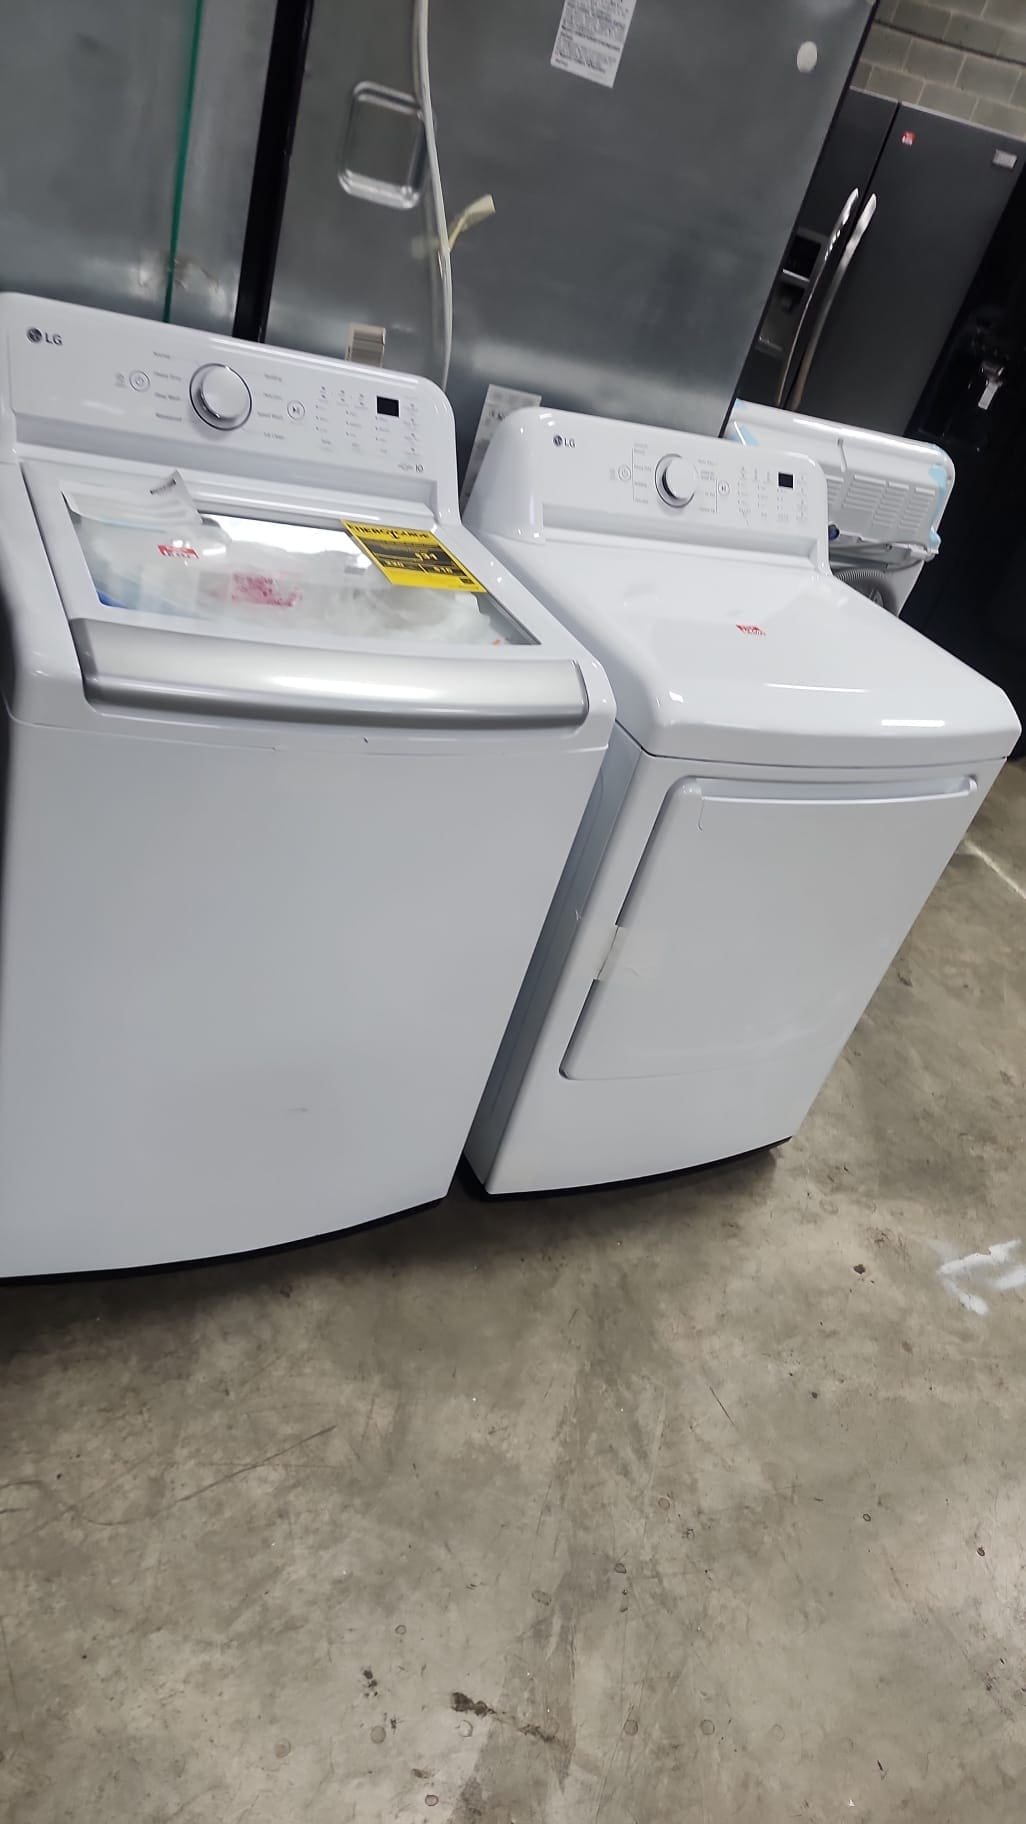 LG 5.8 Cu. Ft. Top Load Washer With 7.3 Cu. Ft. Electric Dryer – White – New